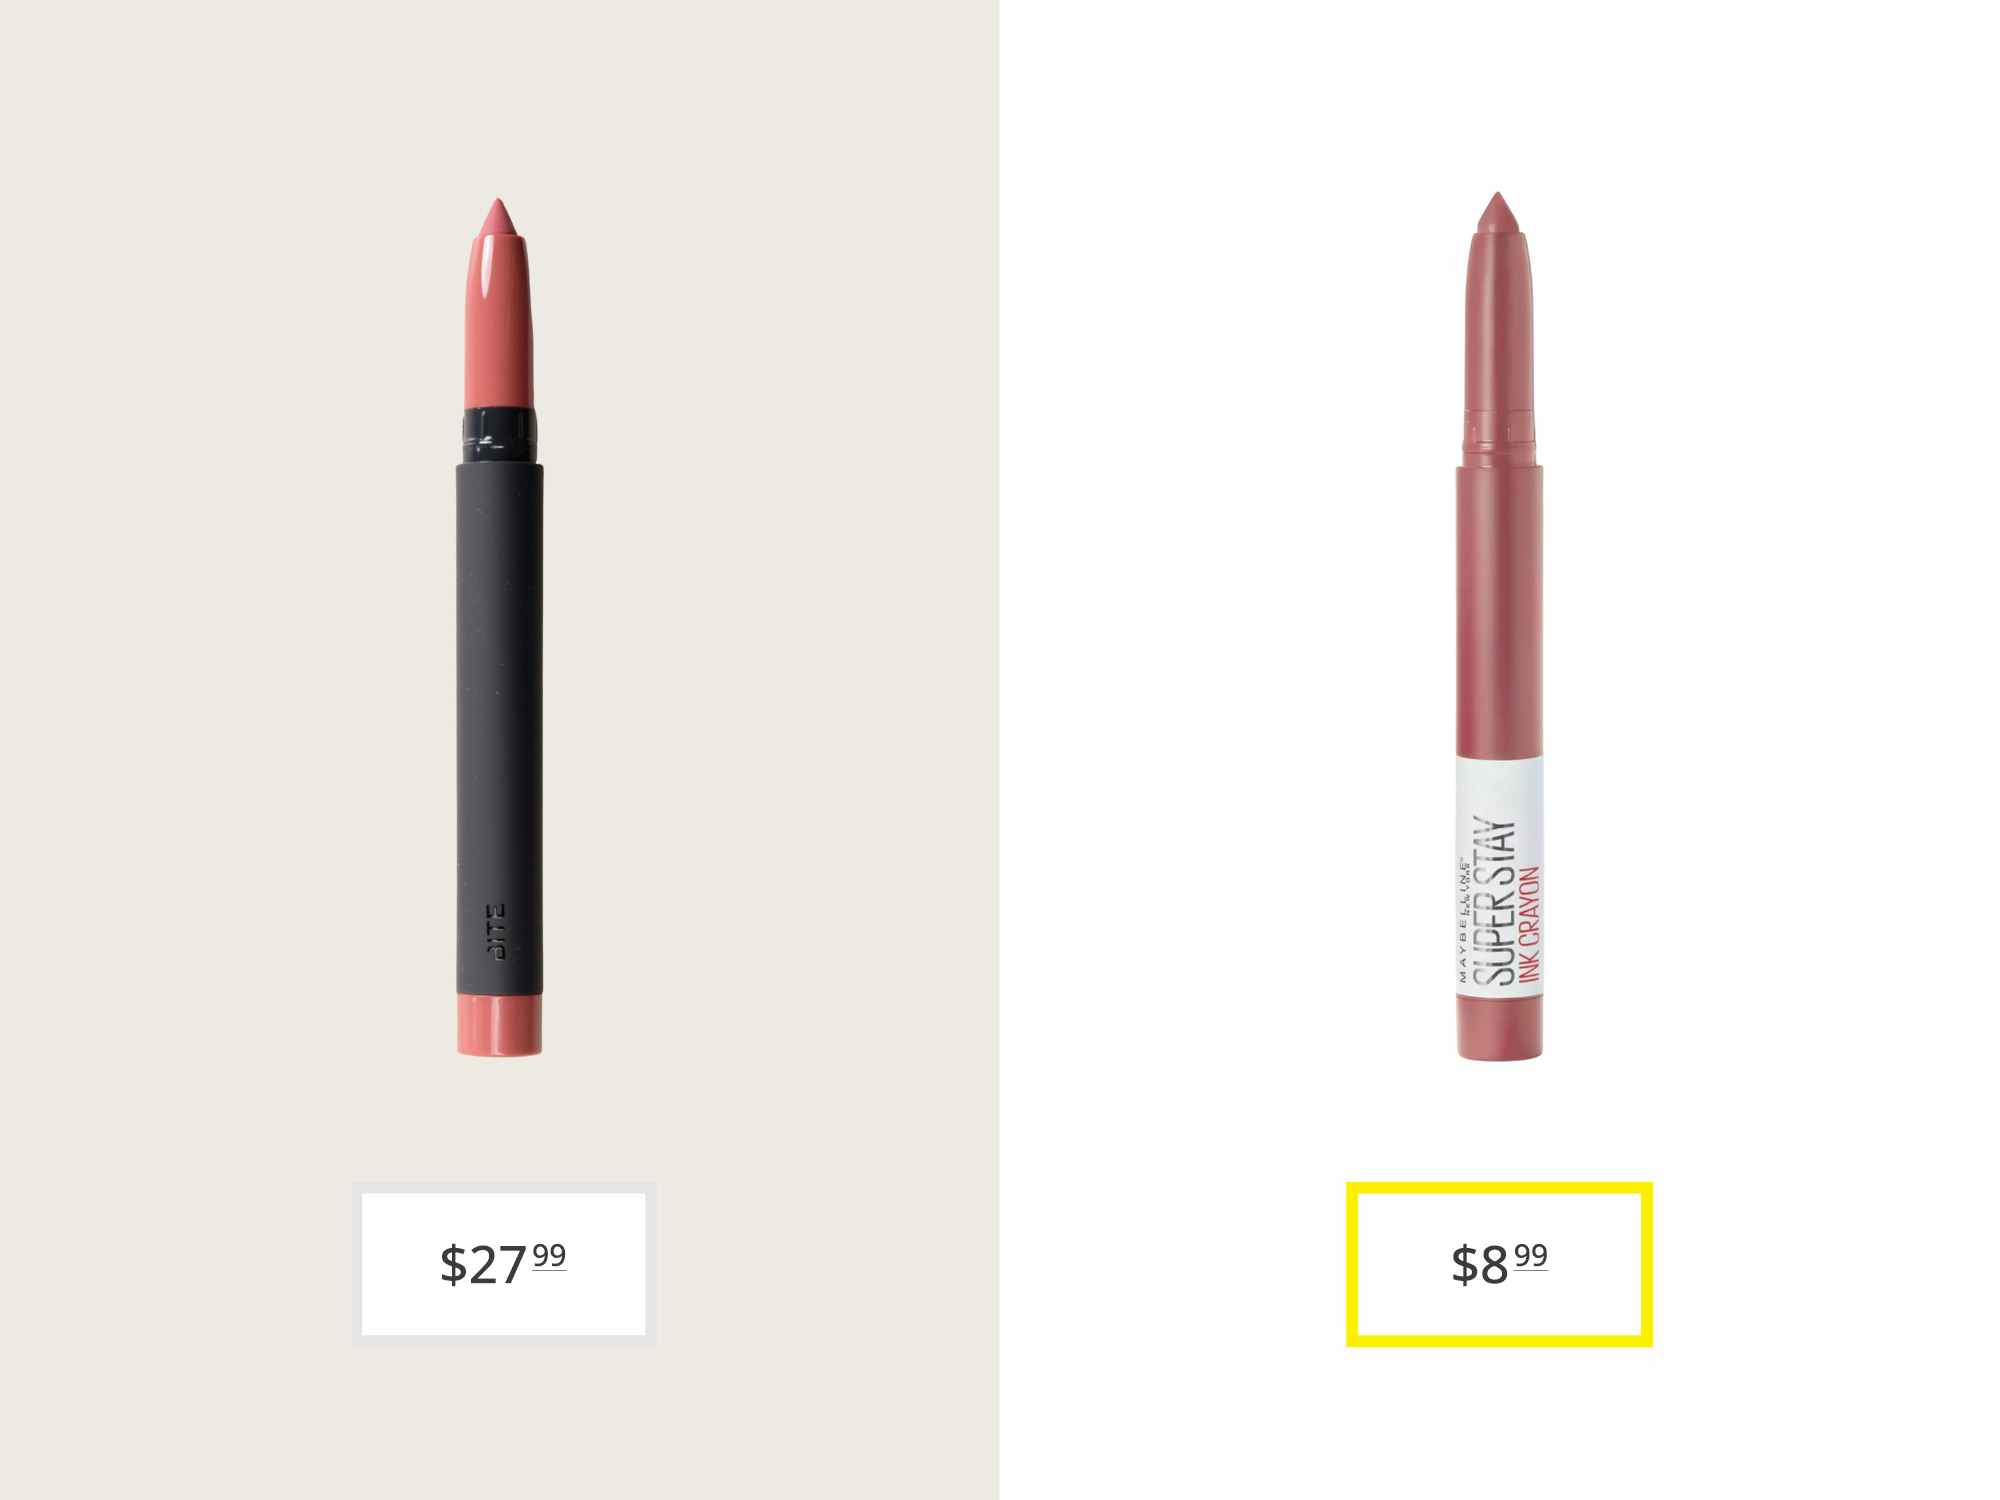 Makeup Dupes and More: The 6 Most Affordable Options for 2023